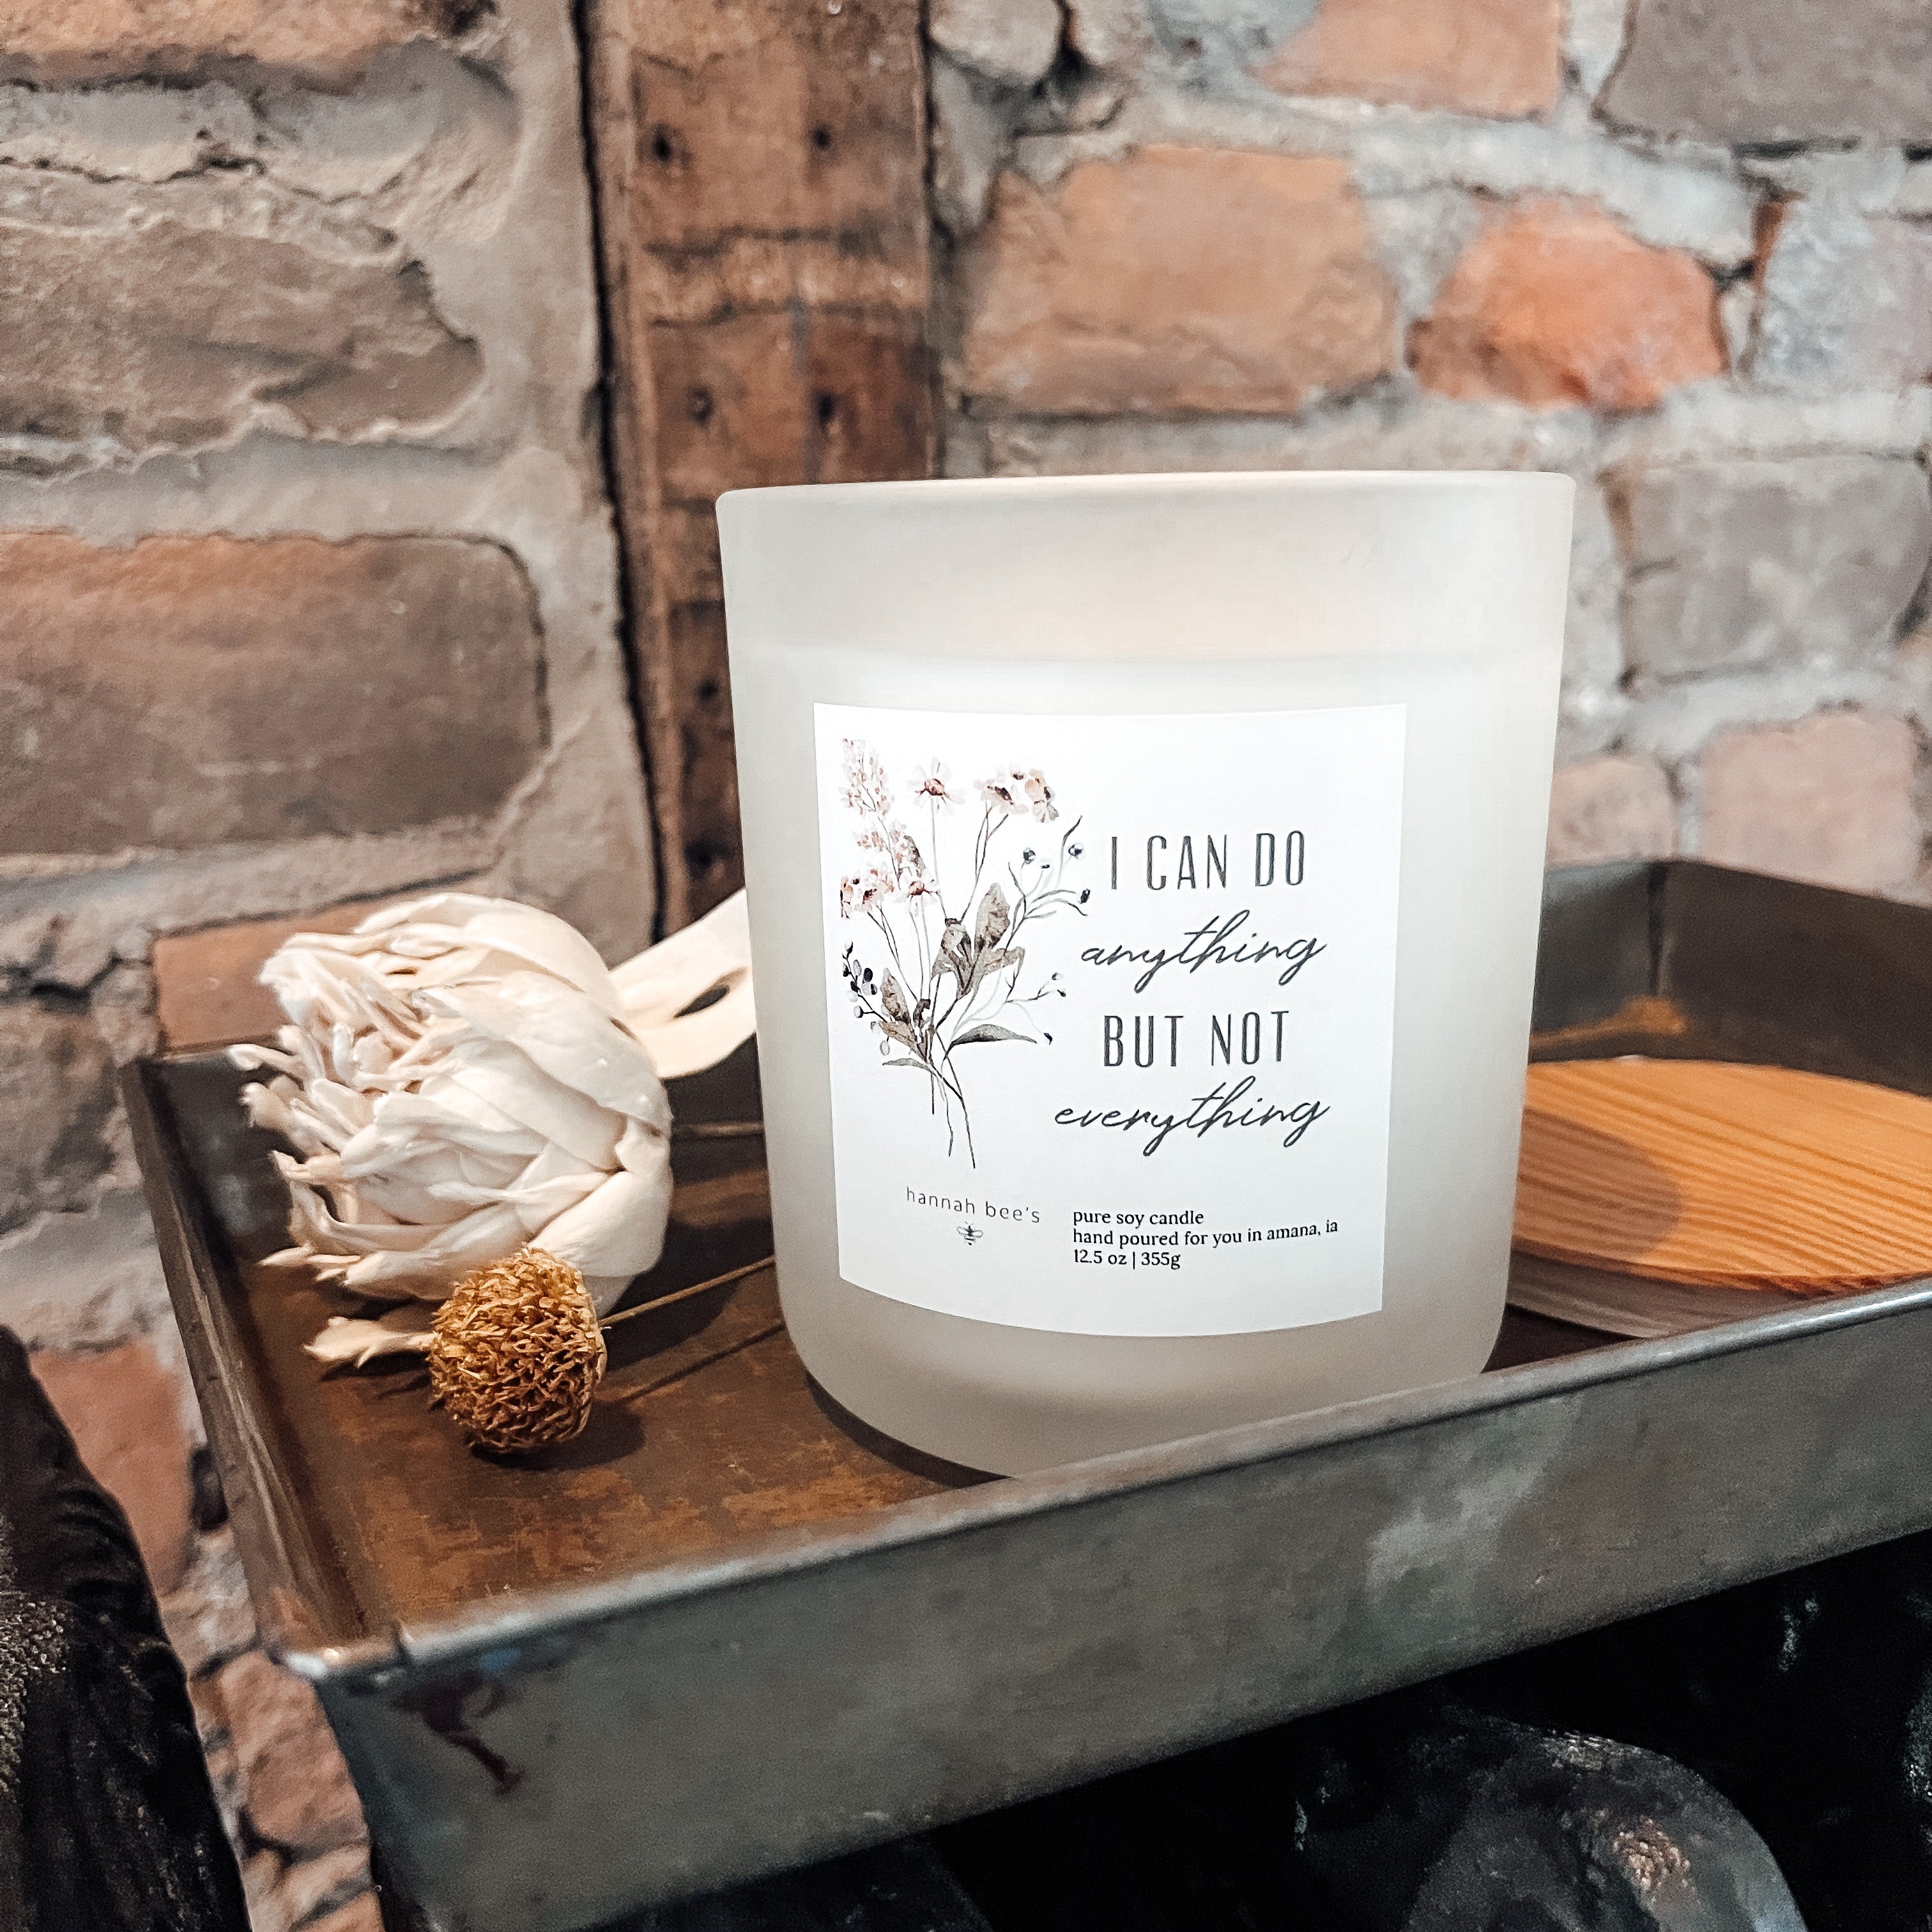 I can do anything - 12.5 oz candle